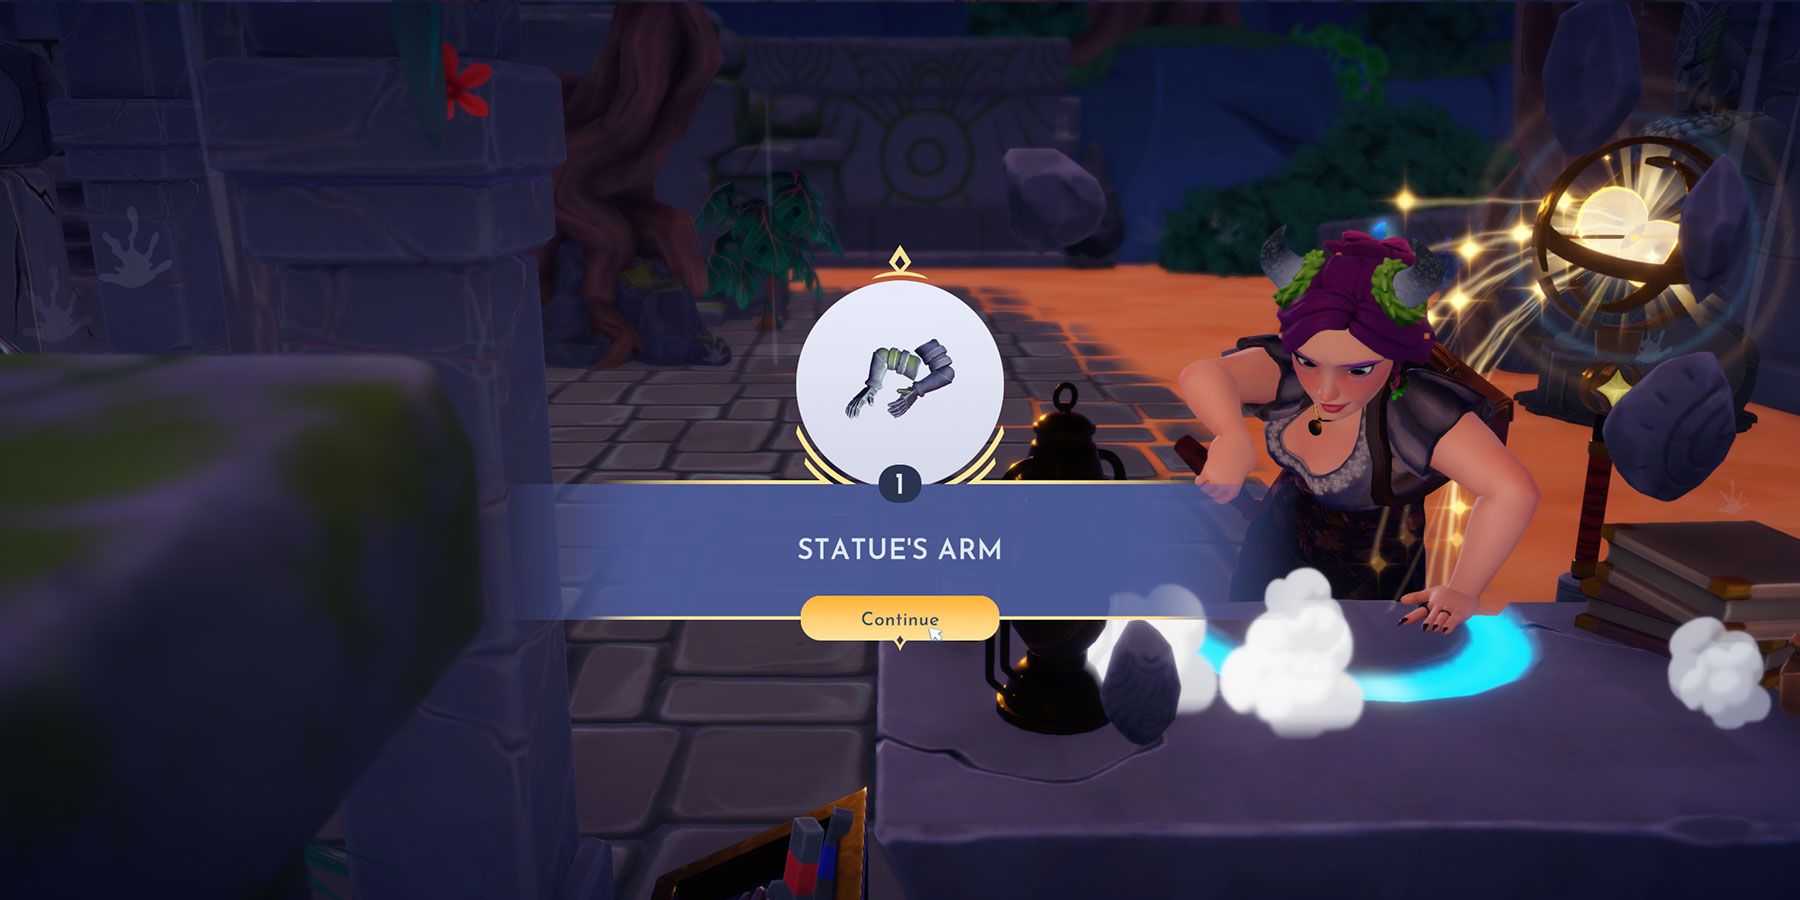 Crafting the Statue Arm in Disney Dreamlight Valley